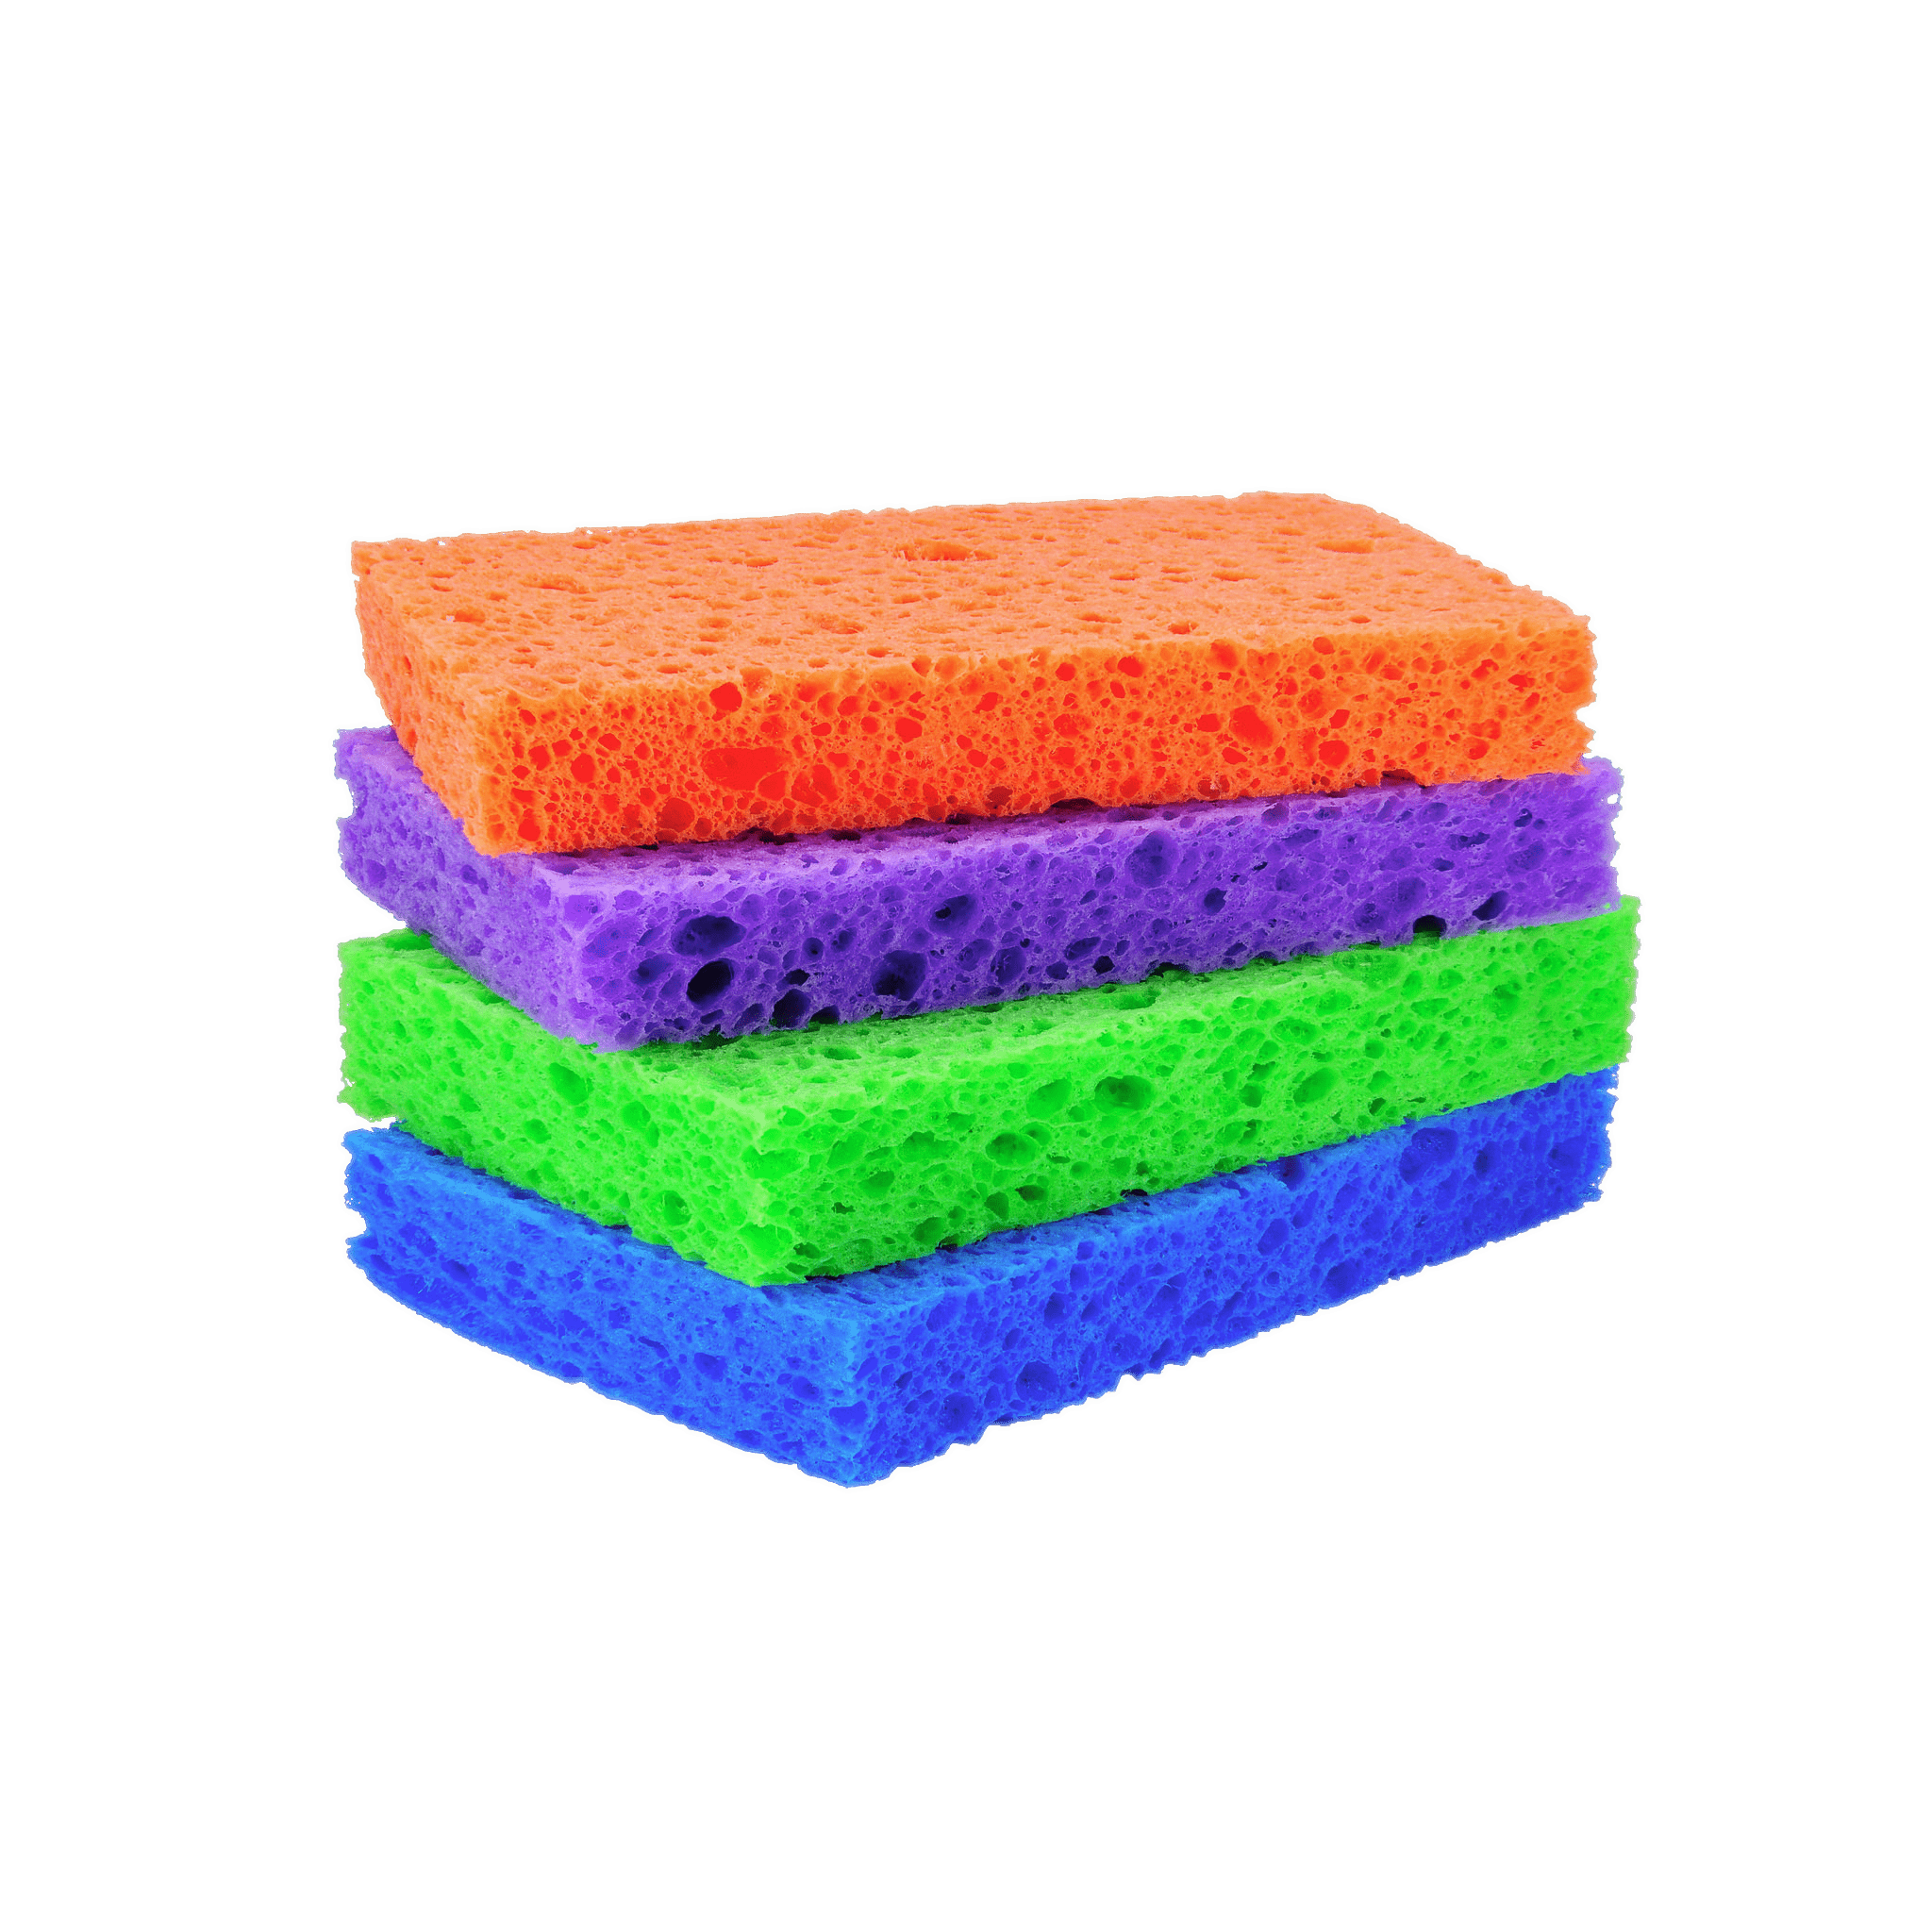 cleaning clipart sponge